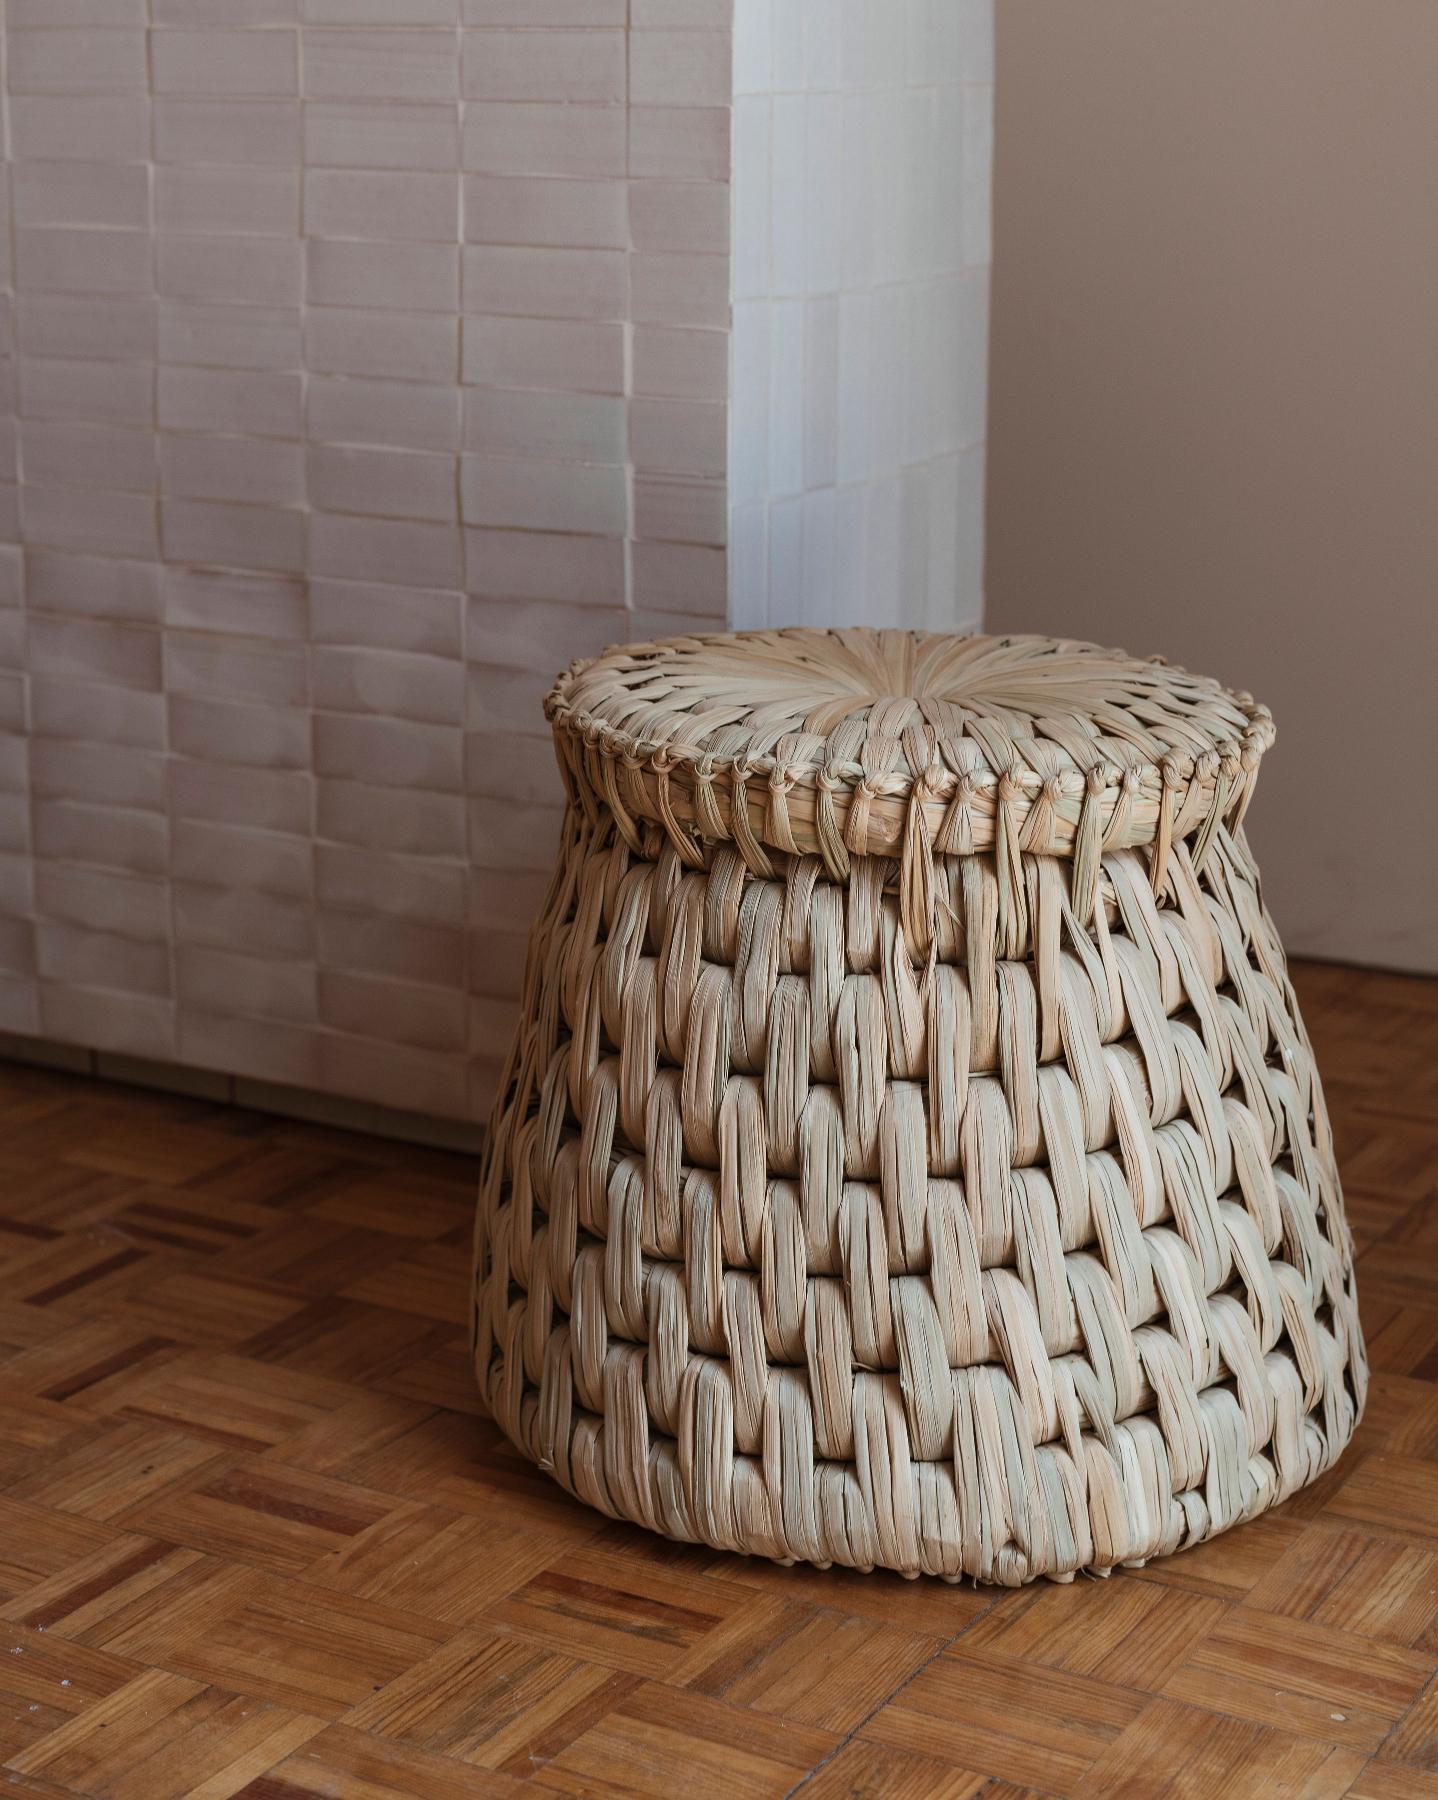 txt.13 Stool by Txt.Ure
Dimensions: Ø 56 x H 50 cm.
Materials: Tulle natural fiber with natural finish.

For indoor and outdoor use (under covered spaces). Please contact us.

Txt. ure was the first design project to reintroduce the Mexican